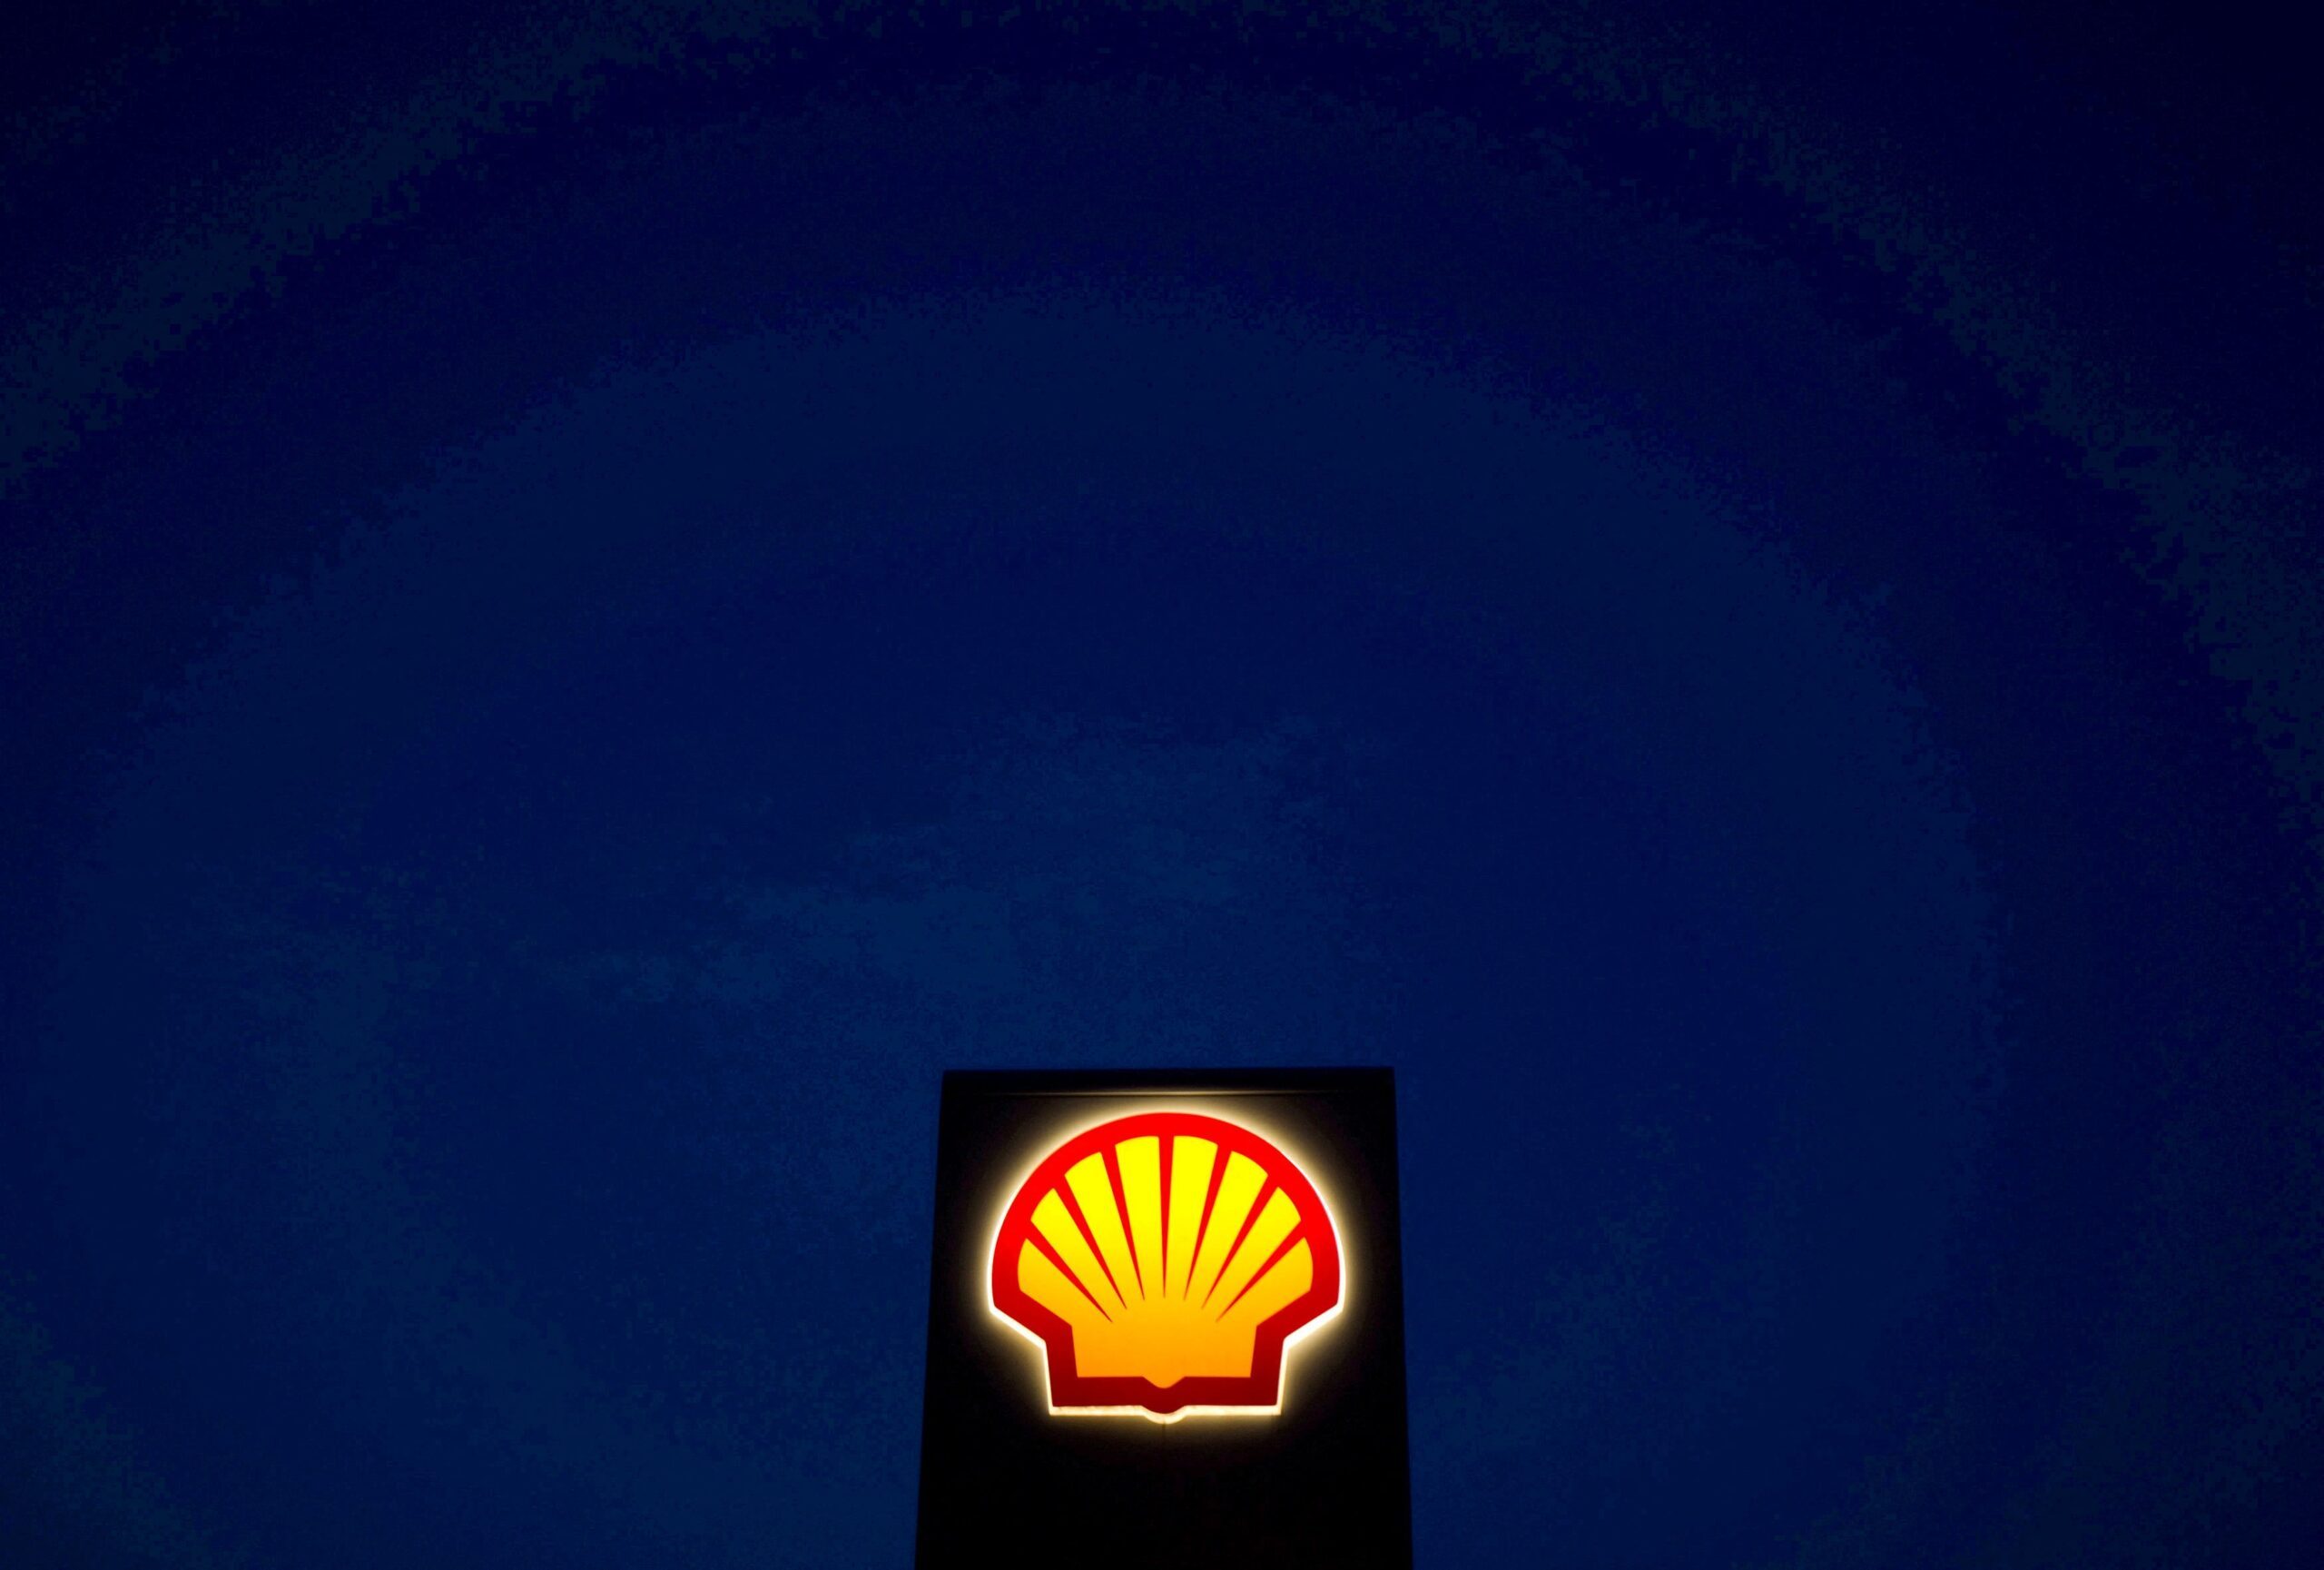 Shell faces $400-million write-down on Russian downstream assets